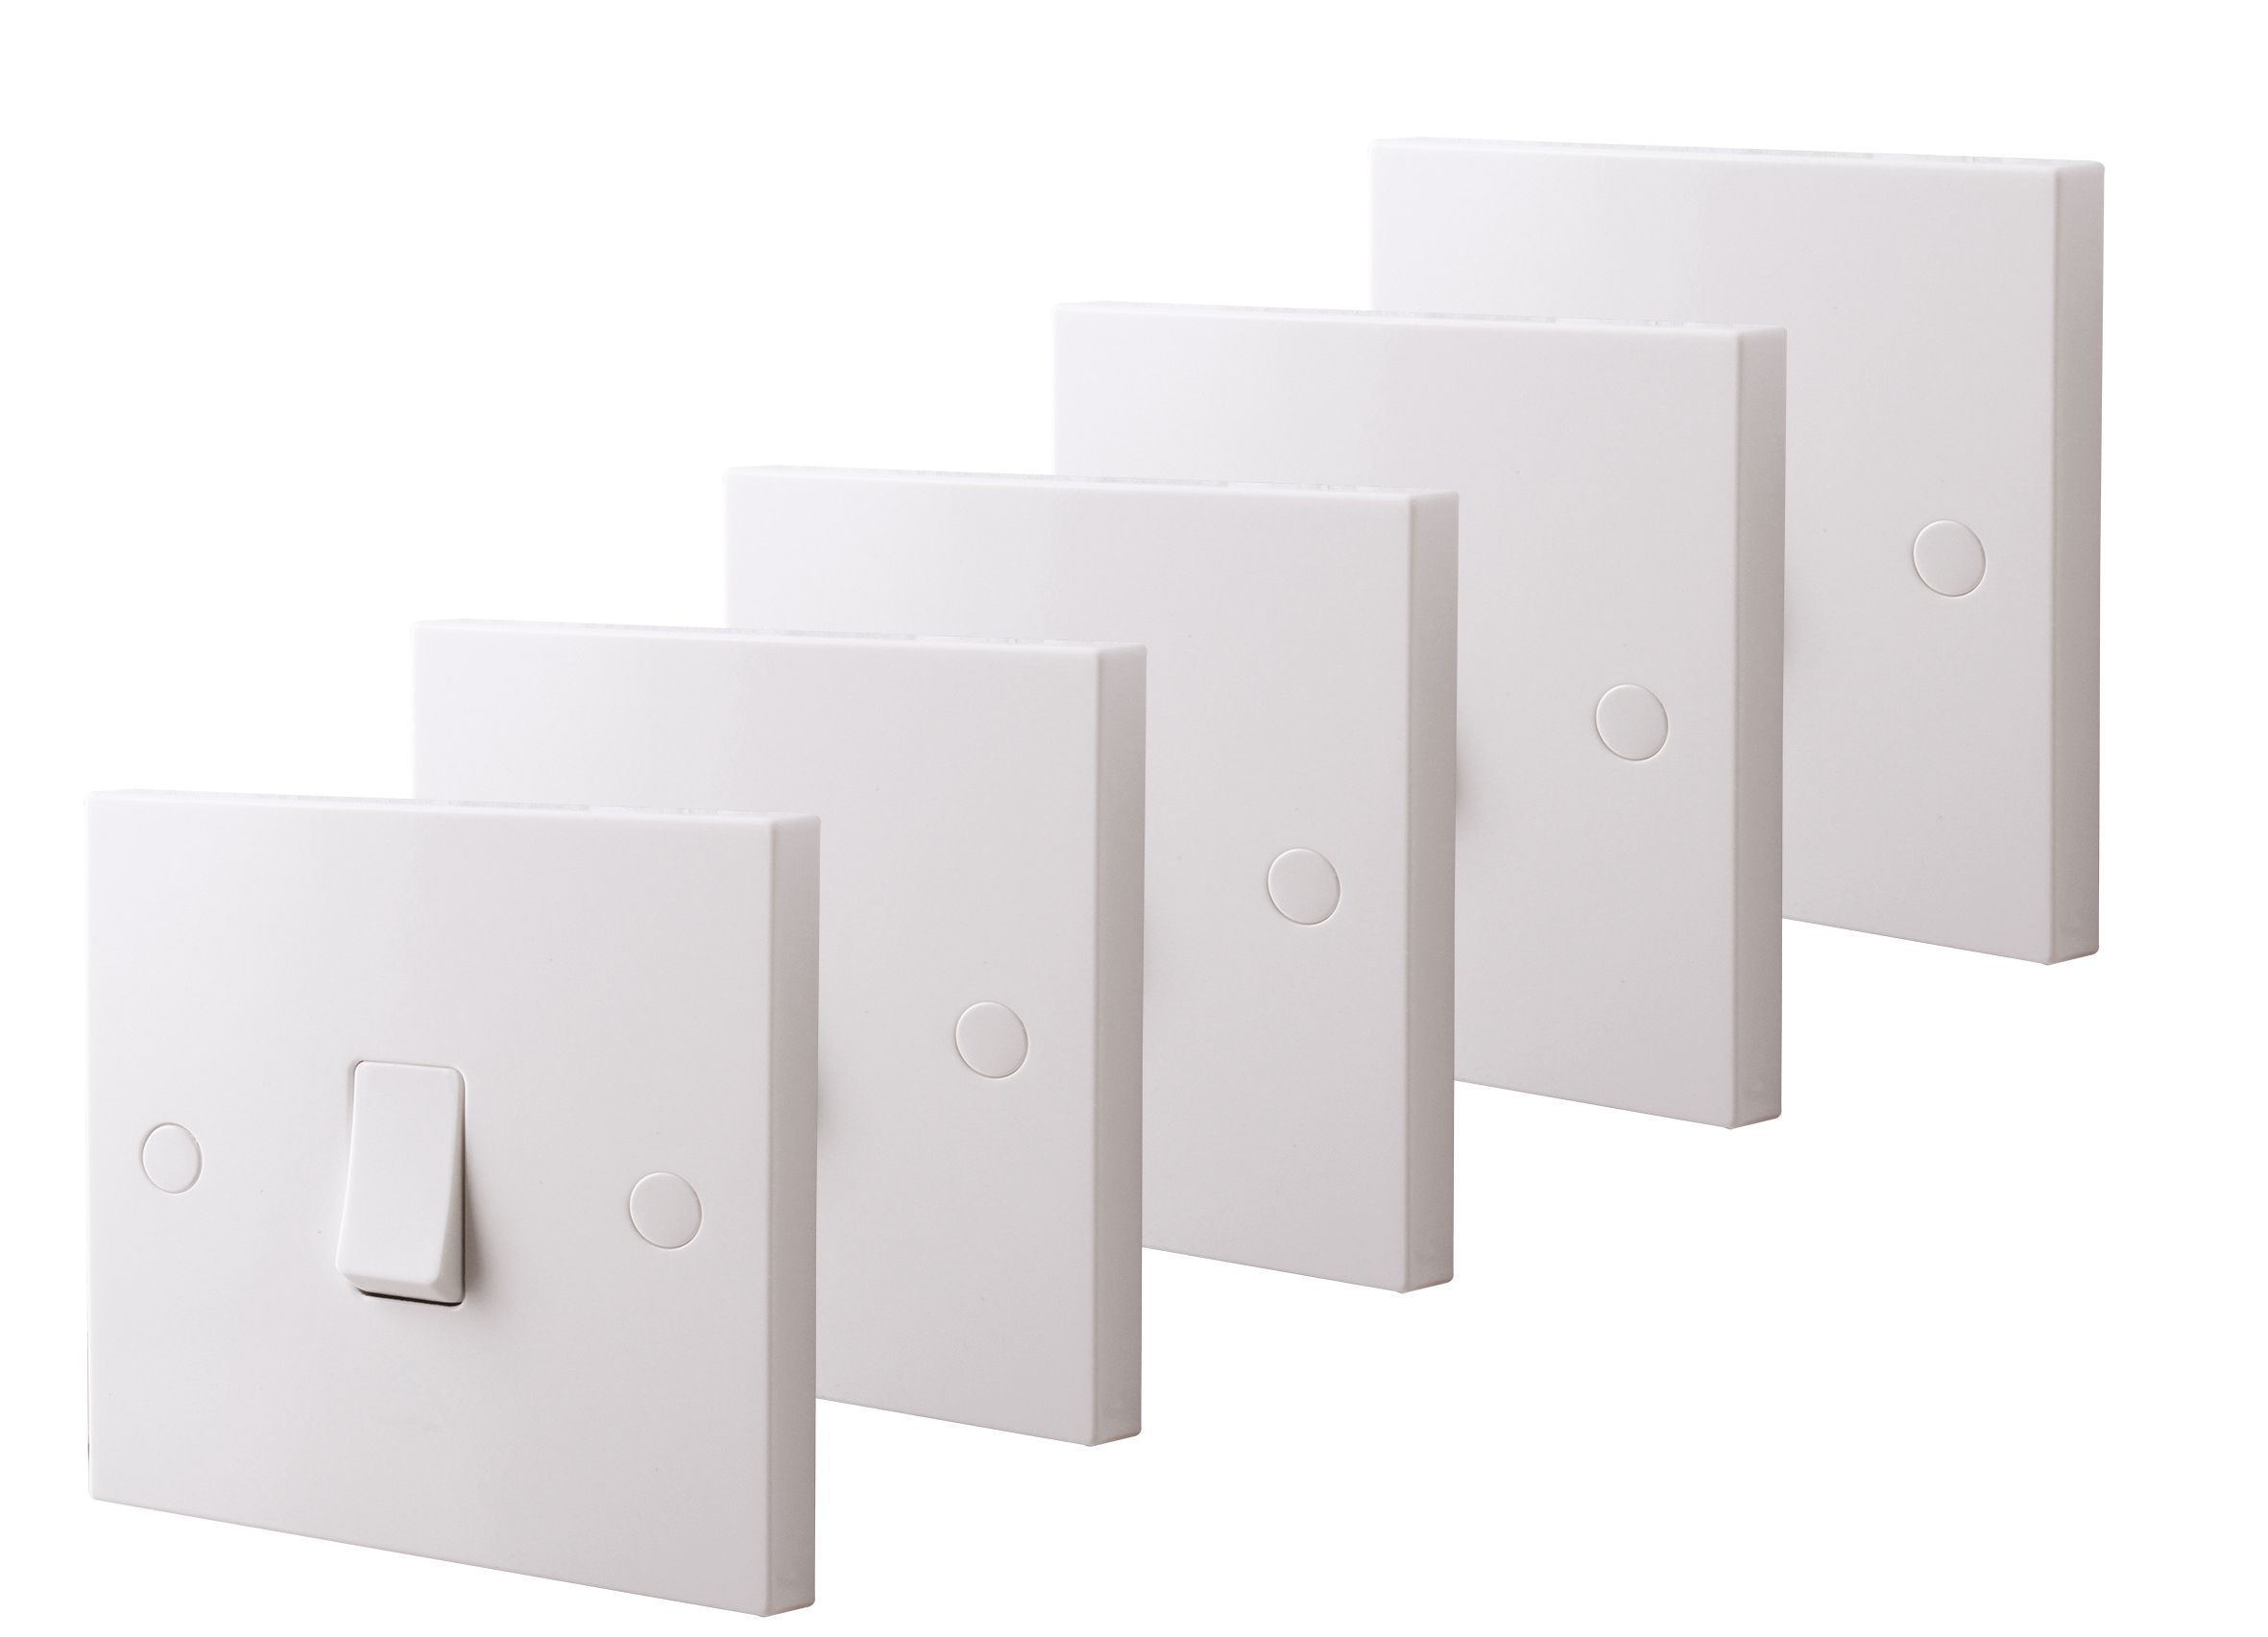 British General 10A 2 way White Single Switch, Pack of 5